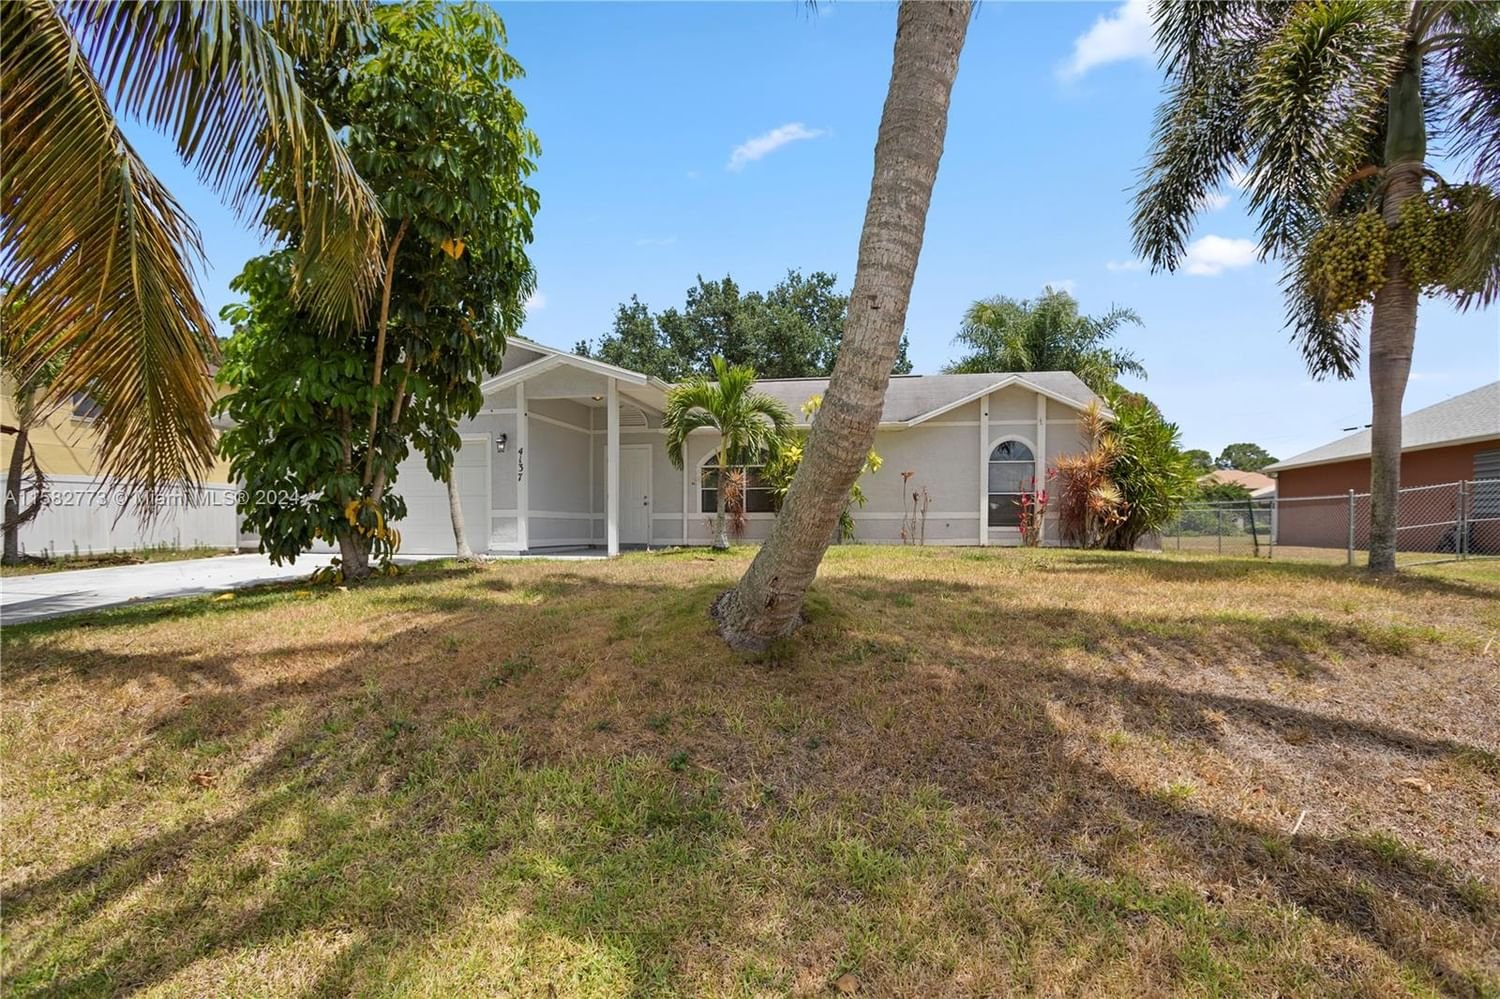 Real estate property located at 4137 Batavia St, St Lucie County, PORT ST LUCIE SECTION 19, Port St. Lucie, FL